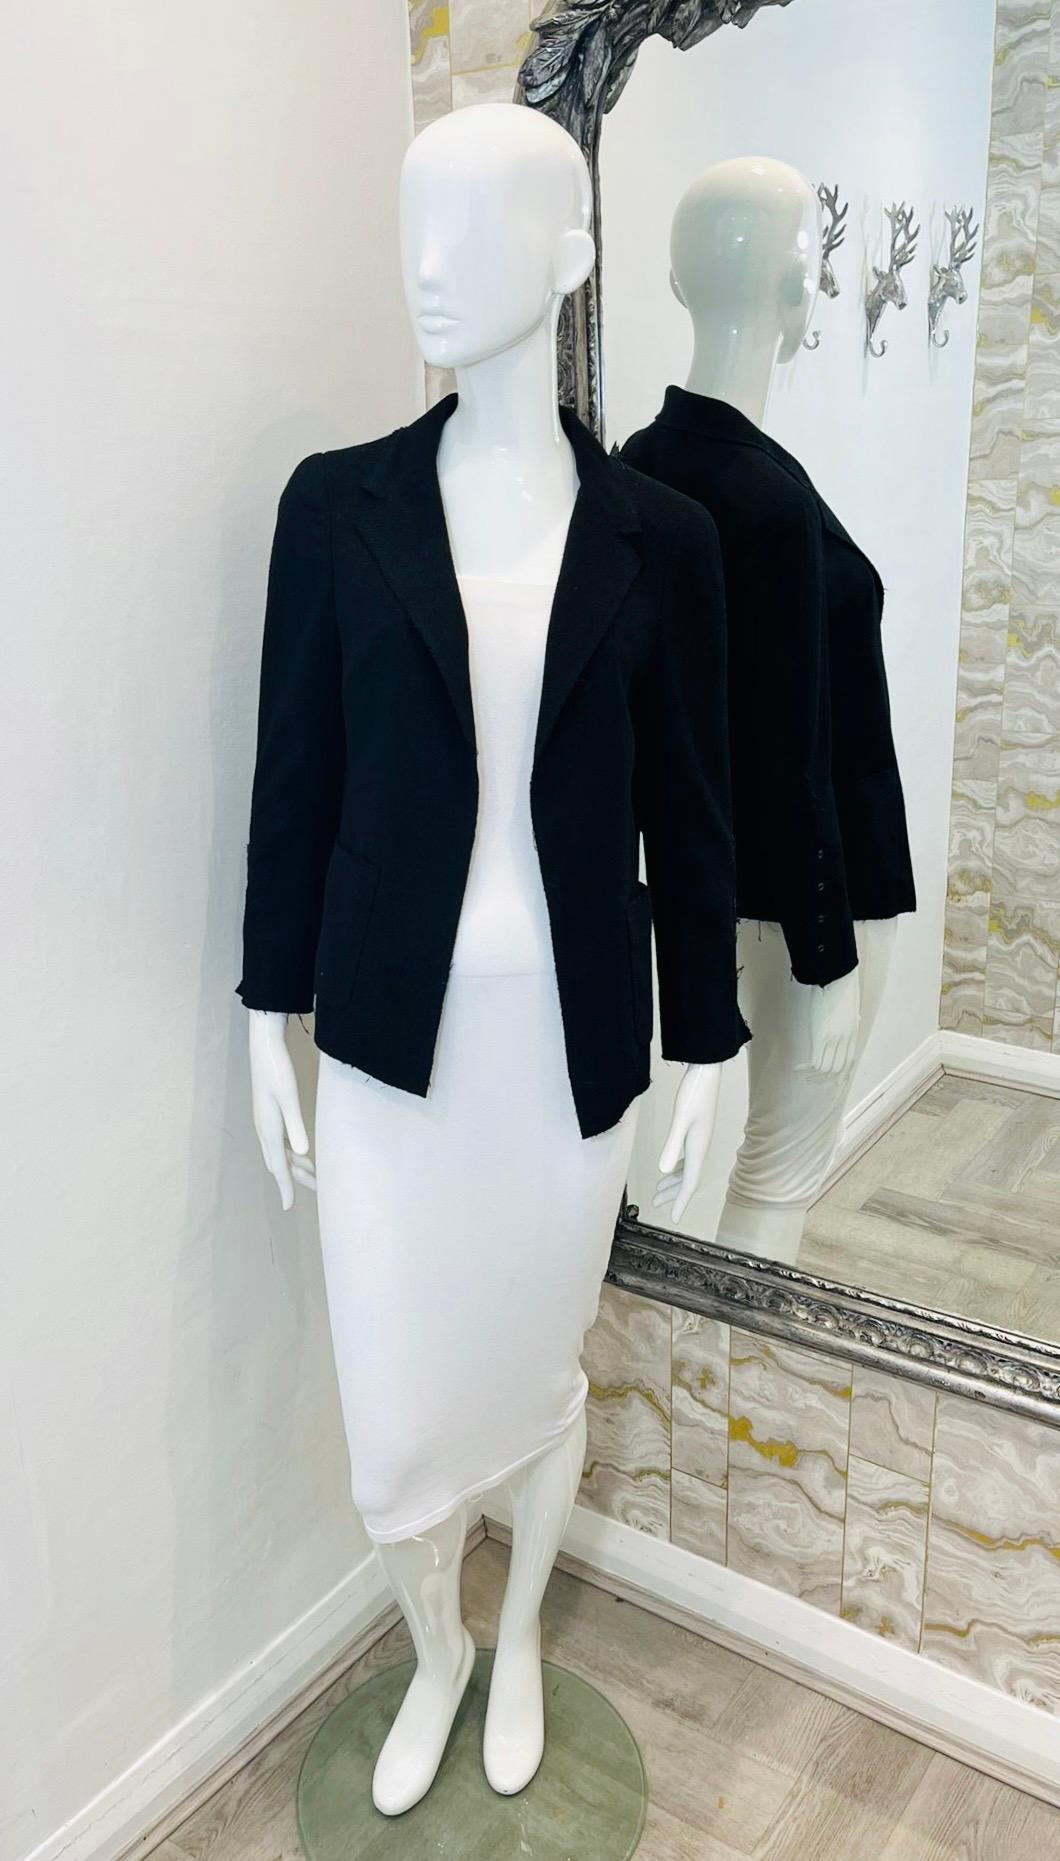 Chanel Raw-Edge Wool Jacket

Black, open jacket designed with 'Chanel Paris' inscribed buttoned cuffs.

Detailed with notched lapels, patch pockets to the sides and silk lining.

From 2007 Spring Collection.

Size – 38FR

Condition – Very